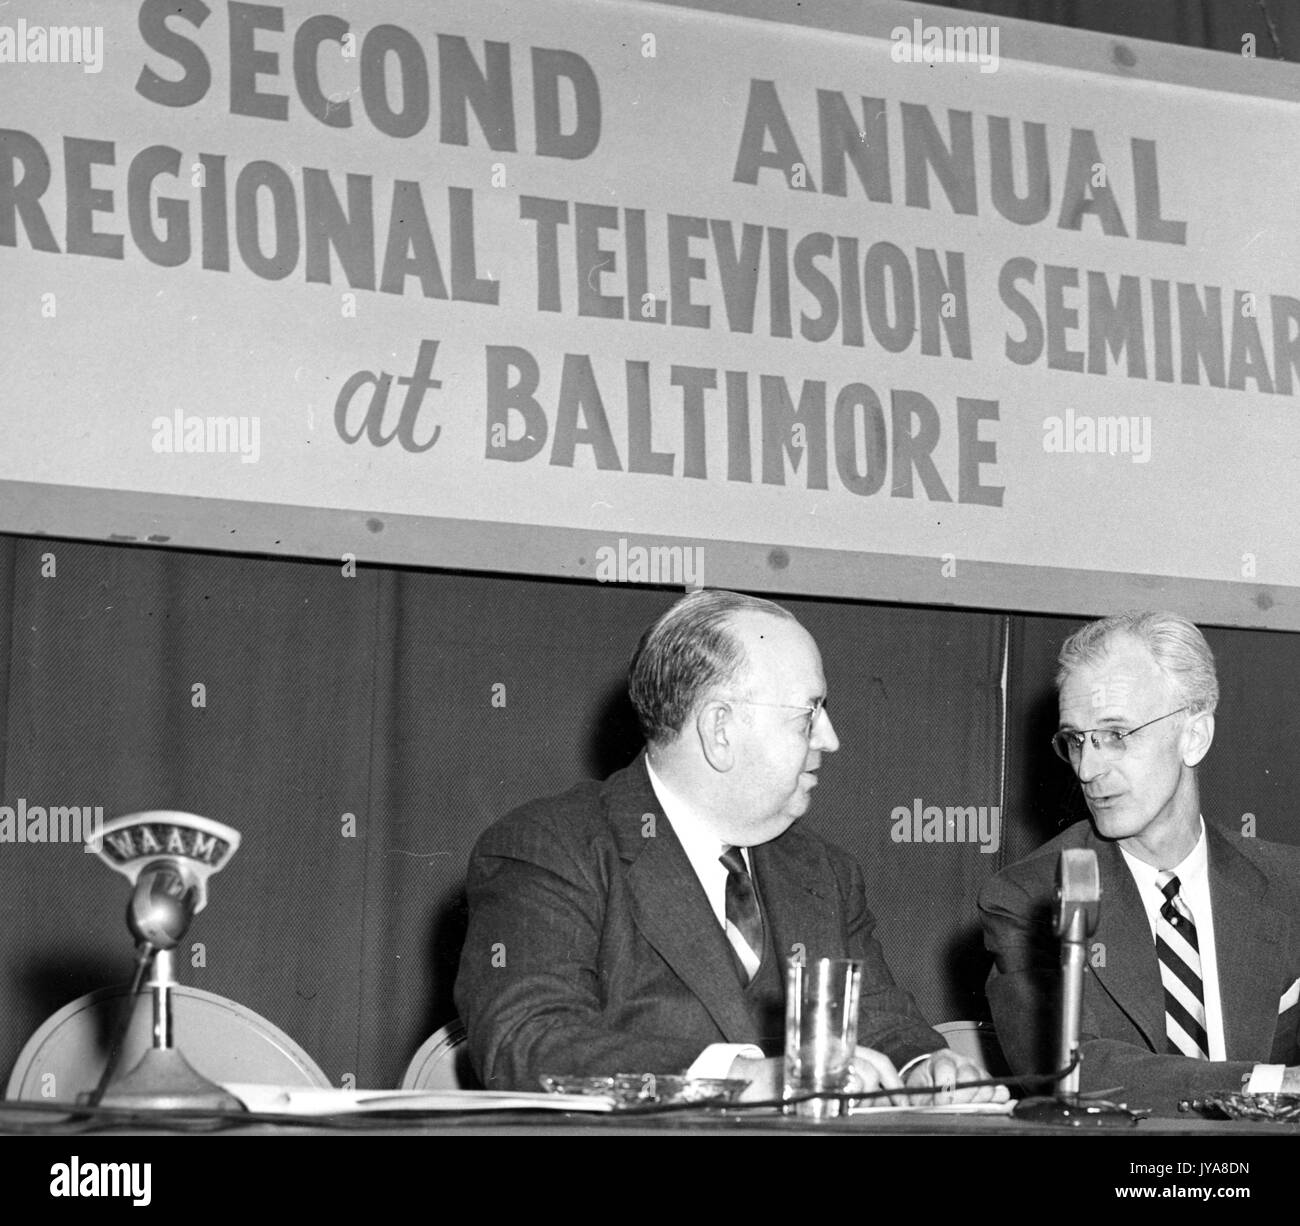 Show during the Second Annual Regional Television Review at Baltimore, featuring American television host Lynn Poole (right) and Dr Franklin Dunham (left), head of the Radio-TV Bureau of the US Office of Education, 1952. Stock Photo